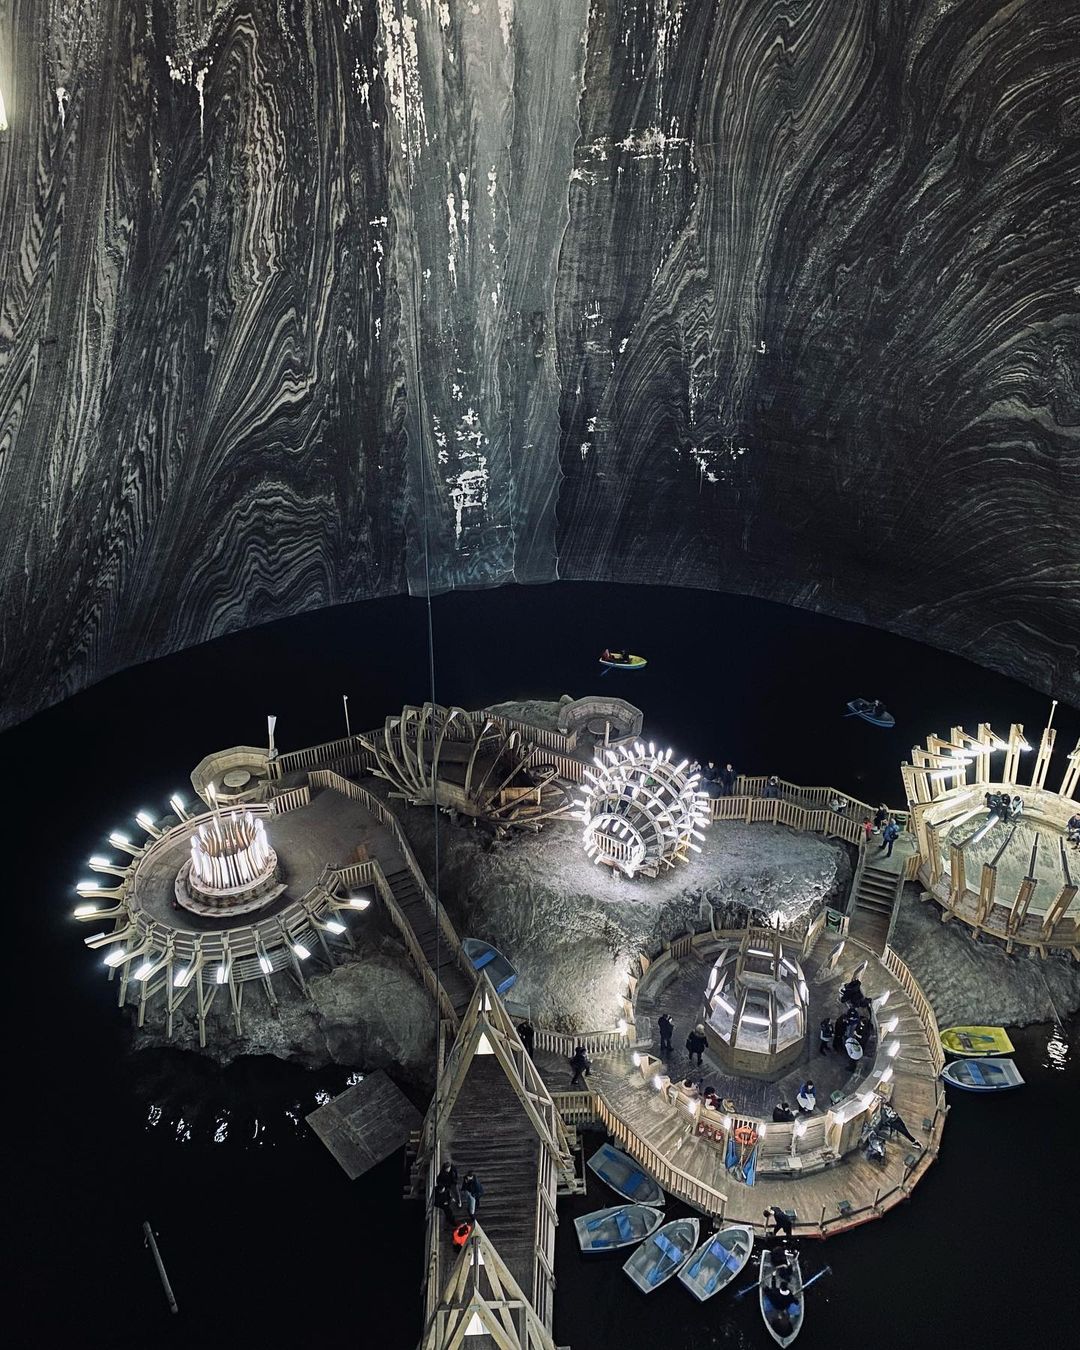 Salina Turda was ranked in 2013 by Business Insider as among the "25 hidden gems around the world that are worth the trek"